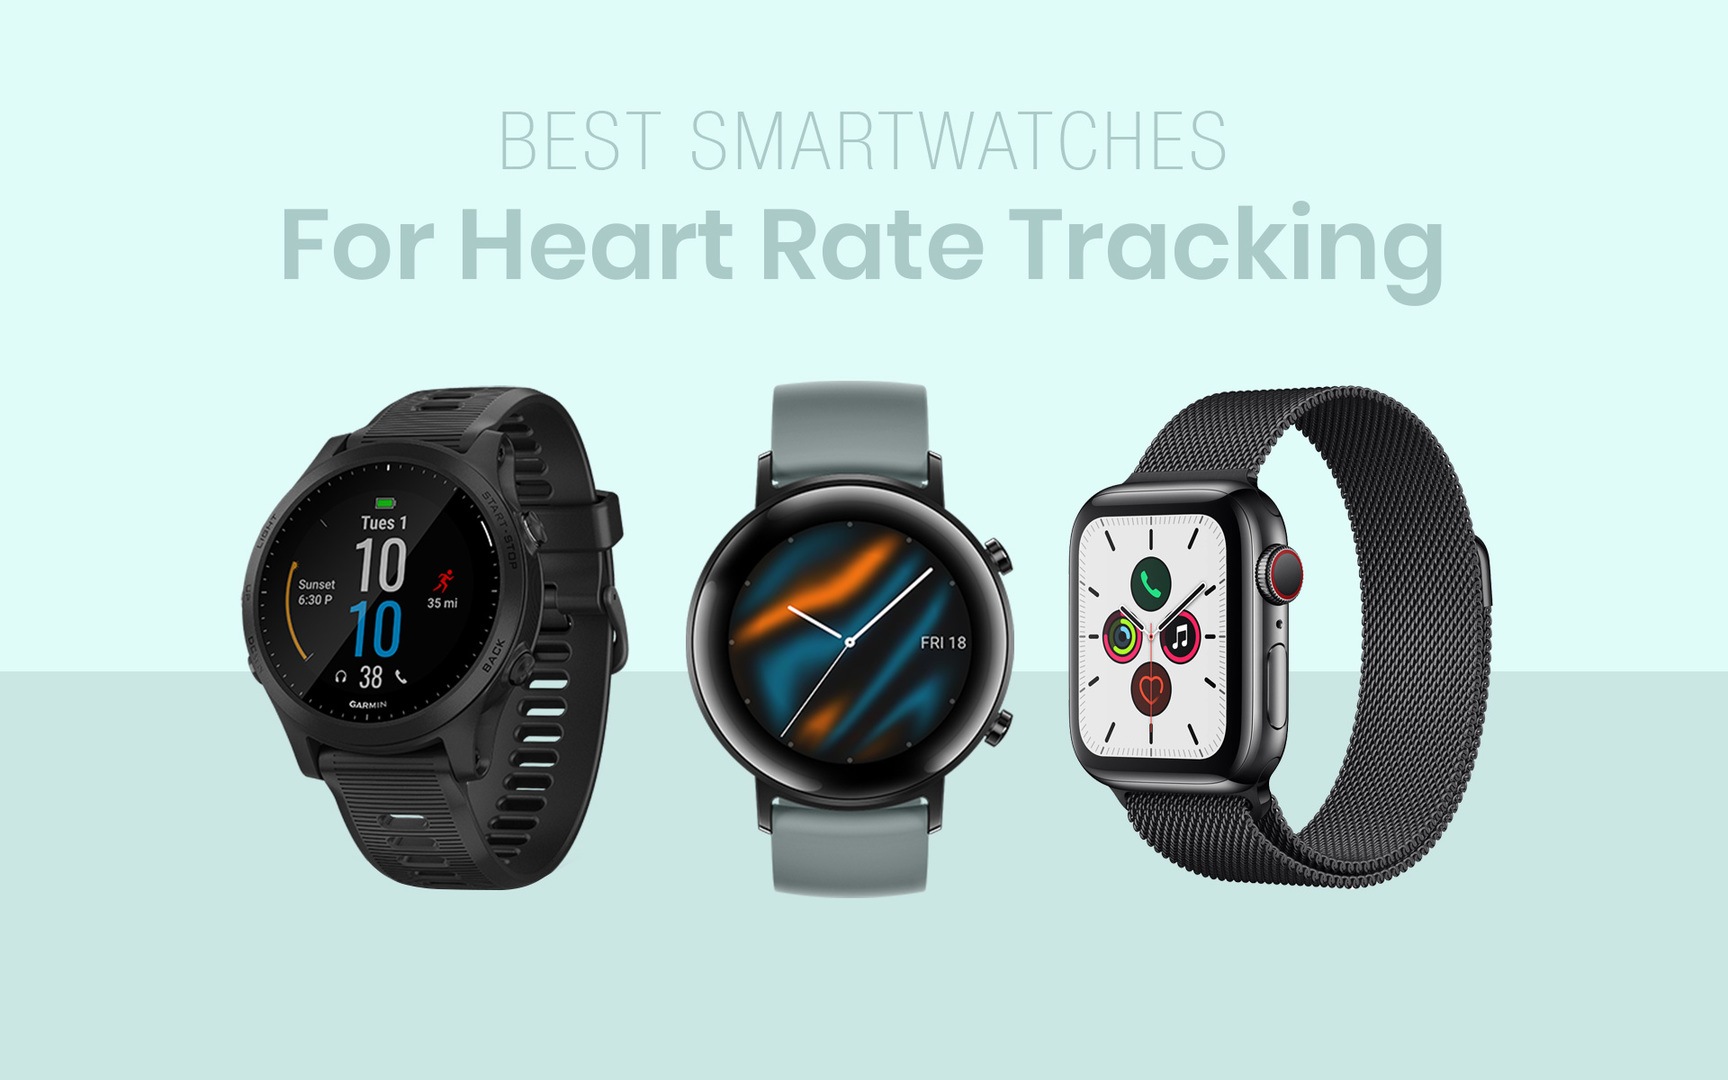 Best Smartwatches For Heart Rate Tracking